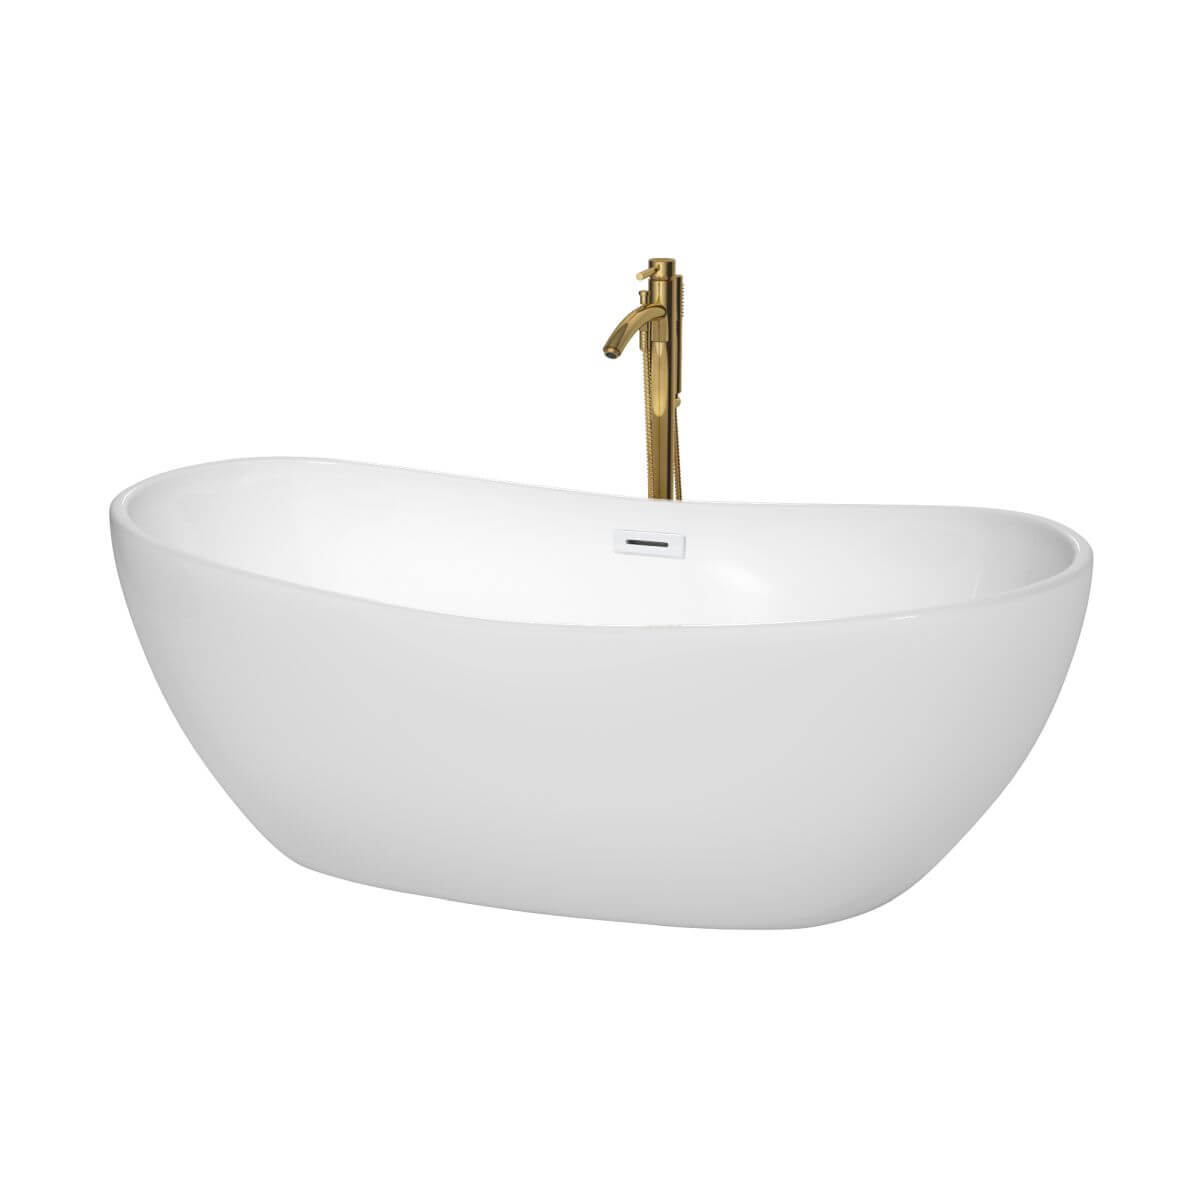 Wyndham Collection Rebecca 65 inch Freestanding Bathtub in White with Shiny White Trim and Floor Mounted Faucet in Brushed Gold - WCOBT101465SWATPGD